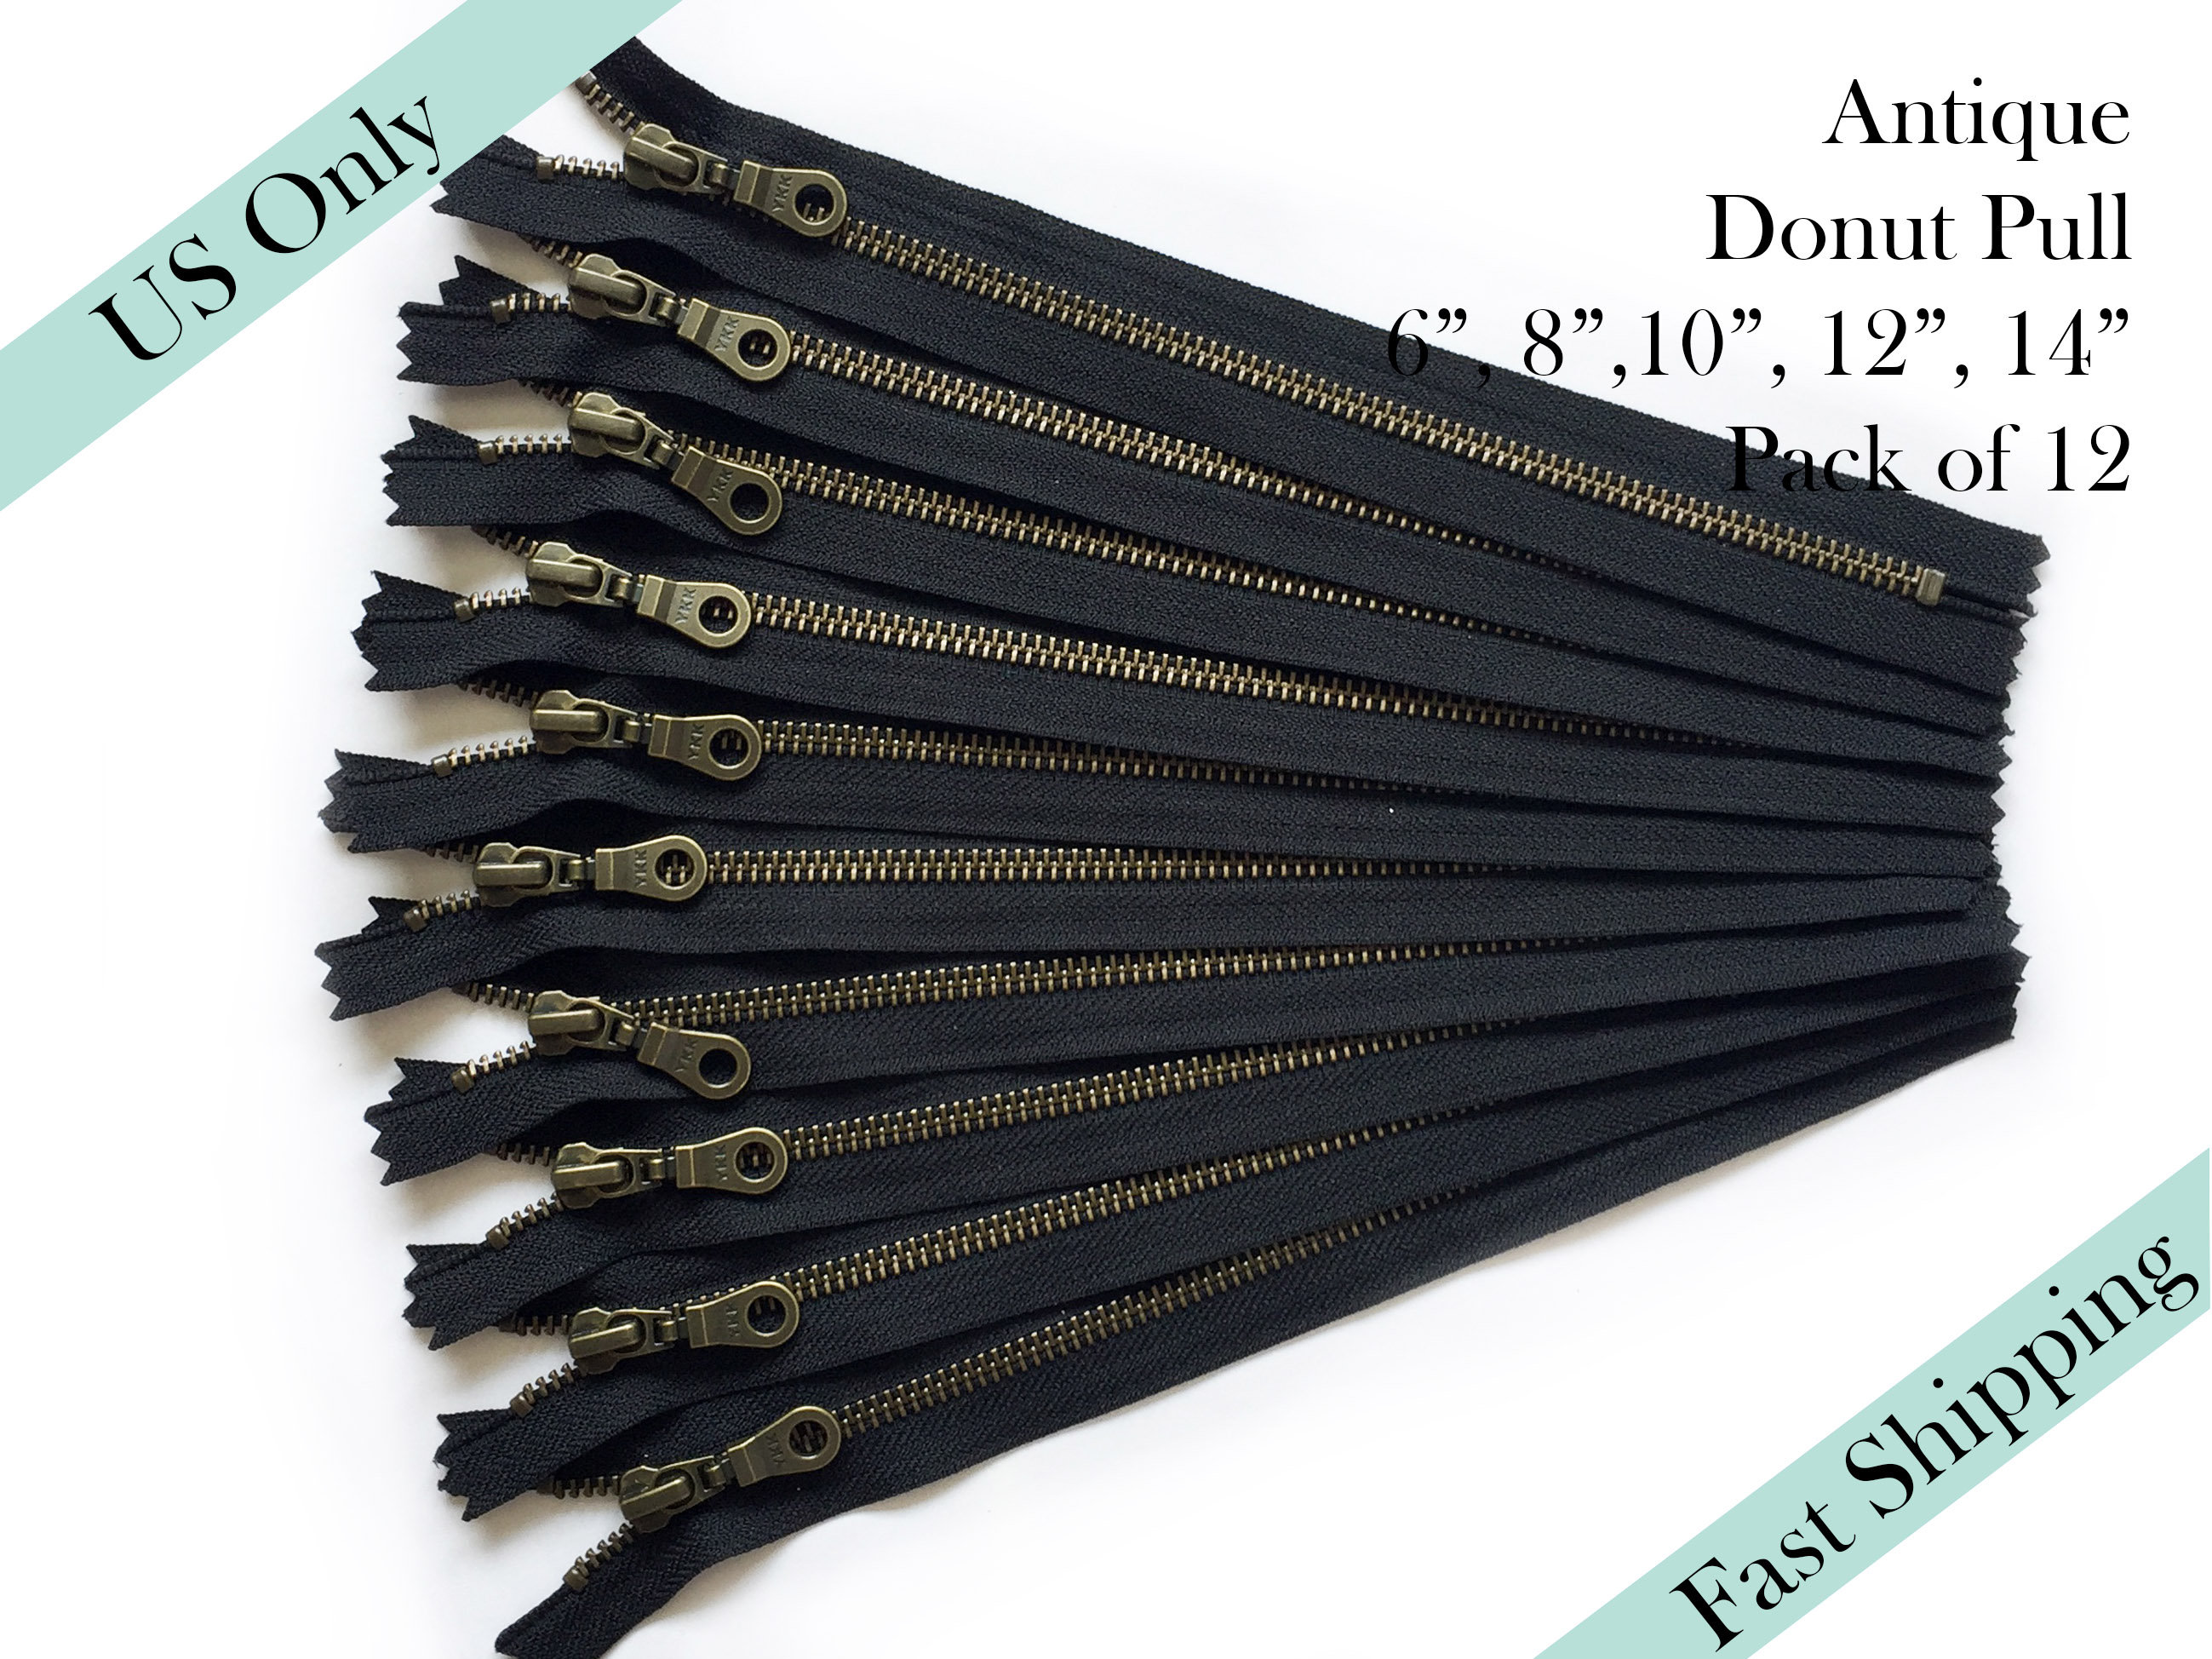 YKK Metal Zippers in Bulk, 5 Pcs, Black Color 580, Gold Teeth, Brass,  Polyester Tape, 4, 5, 6, 7, 8, 9, 10, 12, 14 Inch Sizes, No 5 Teeth 